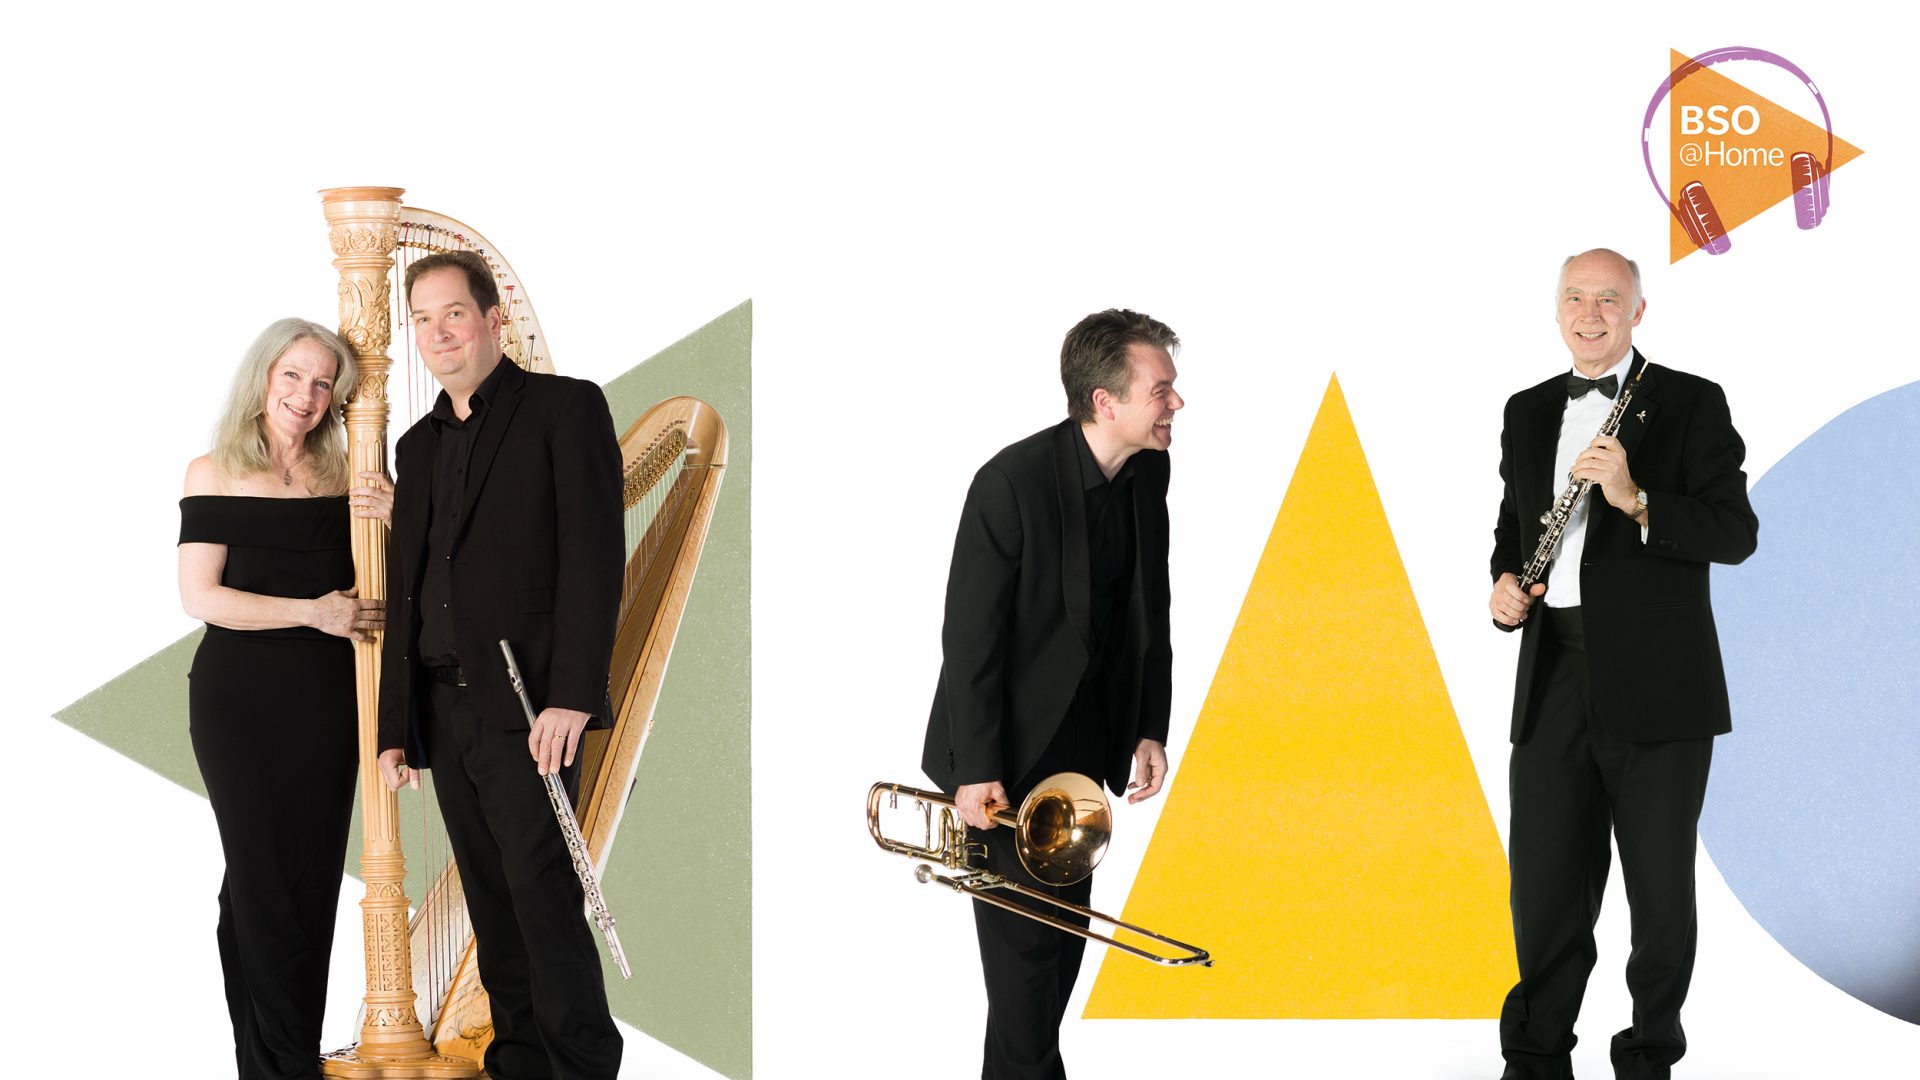 A variety of our musicians on branded imagery for our BSO Concert season coda.